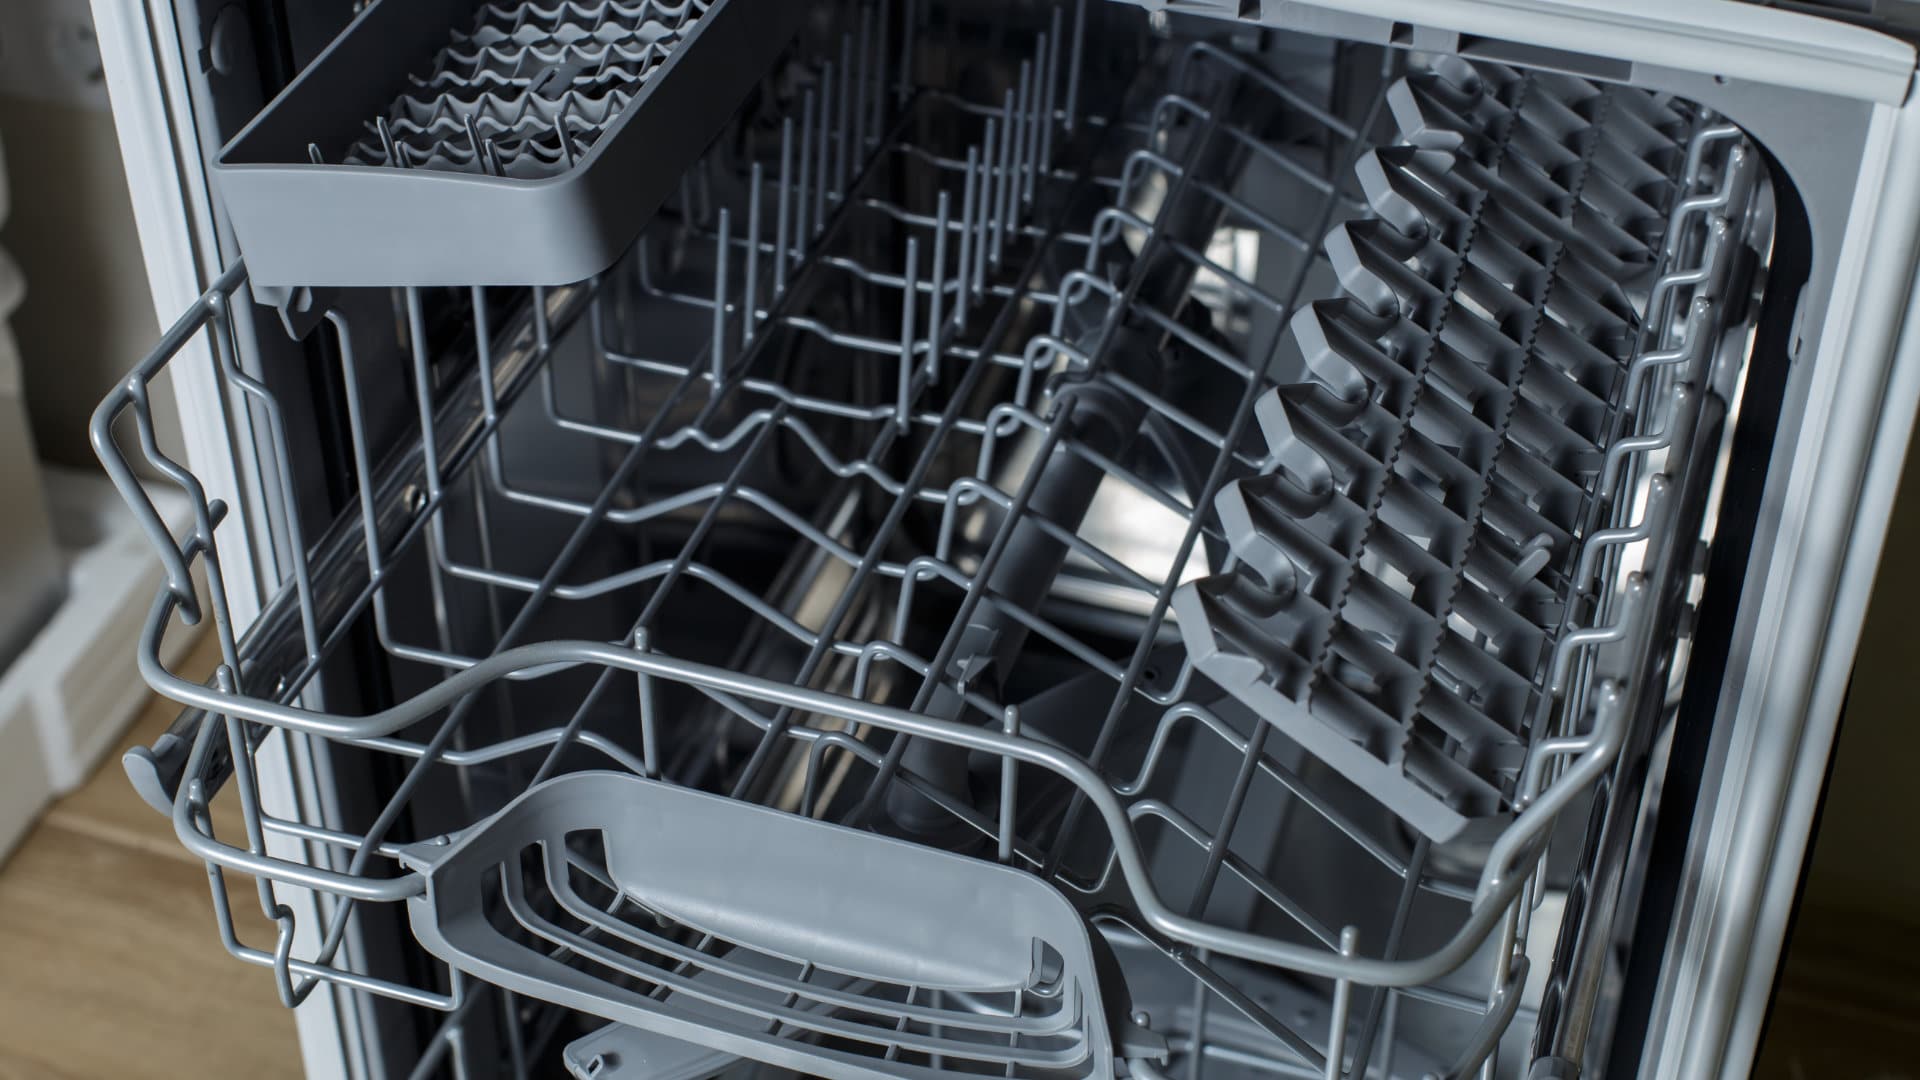 Featured image for “Dishwasher Troubleshooting: Bosch Error Codes Explained”